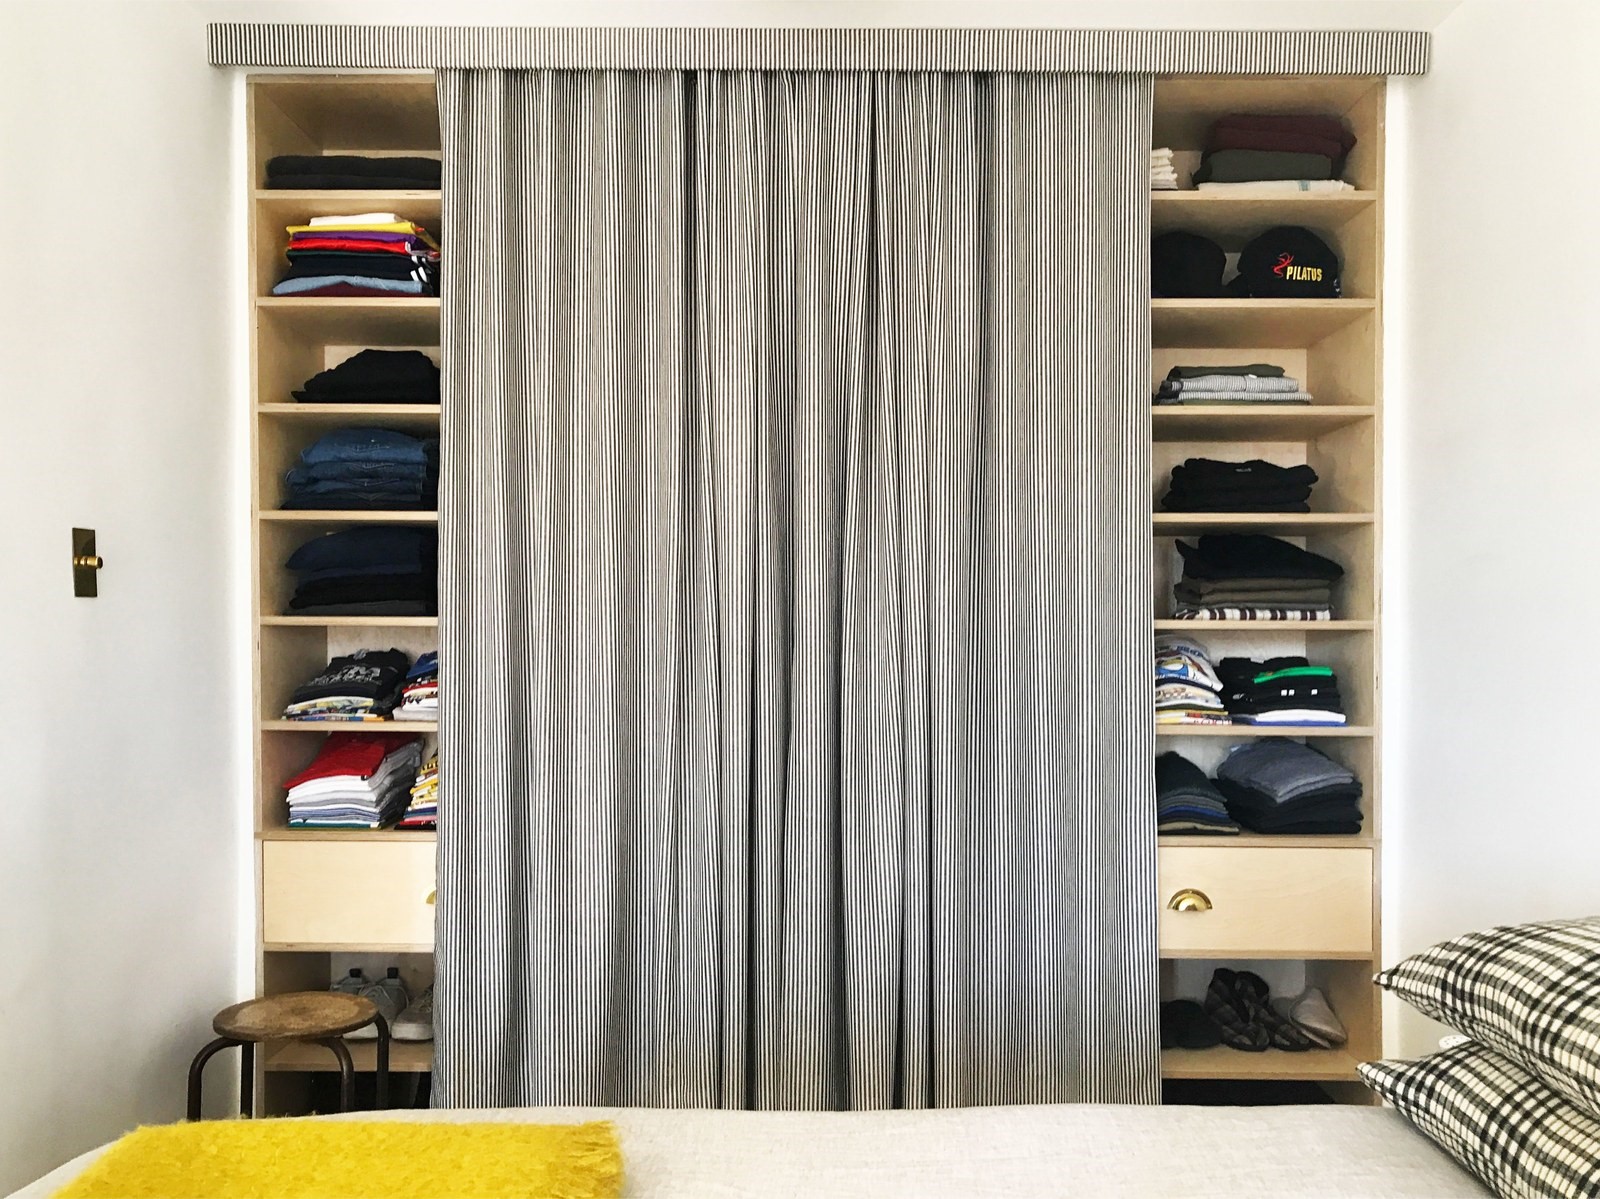 1.Cover Your Cabinets with Curtains via Simphome